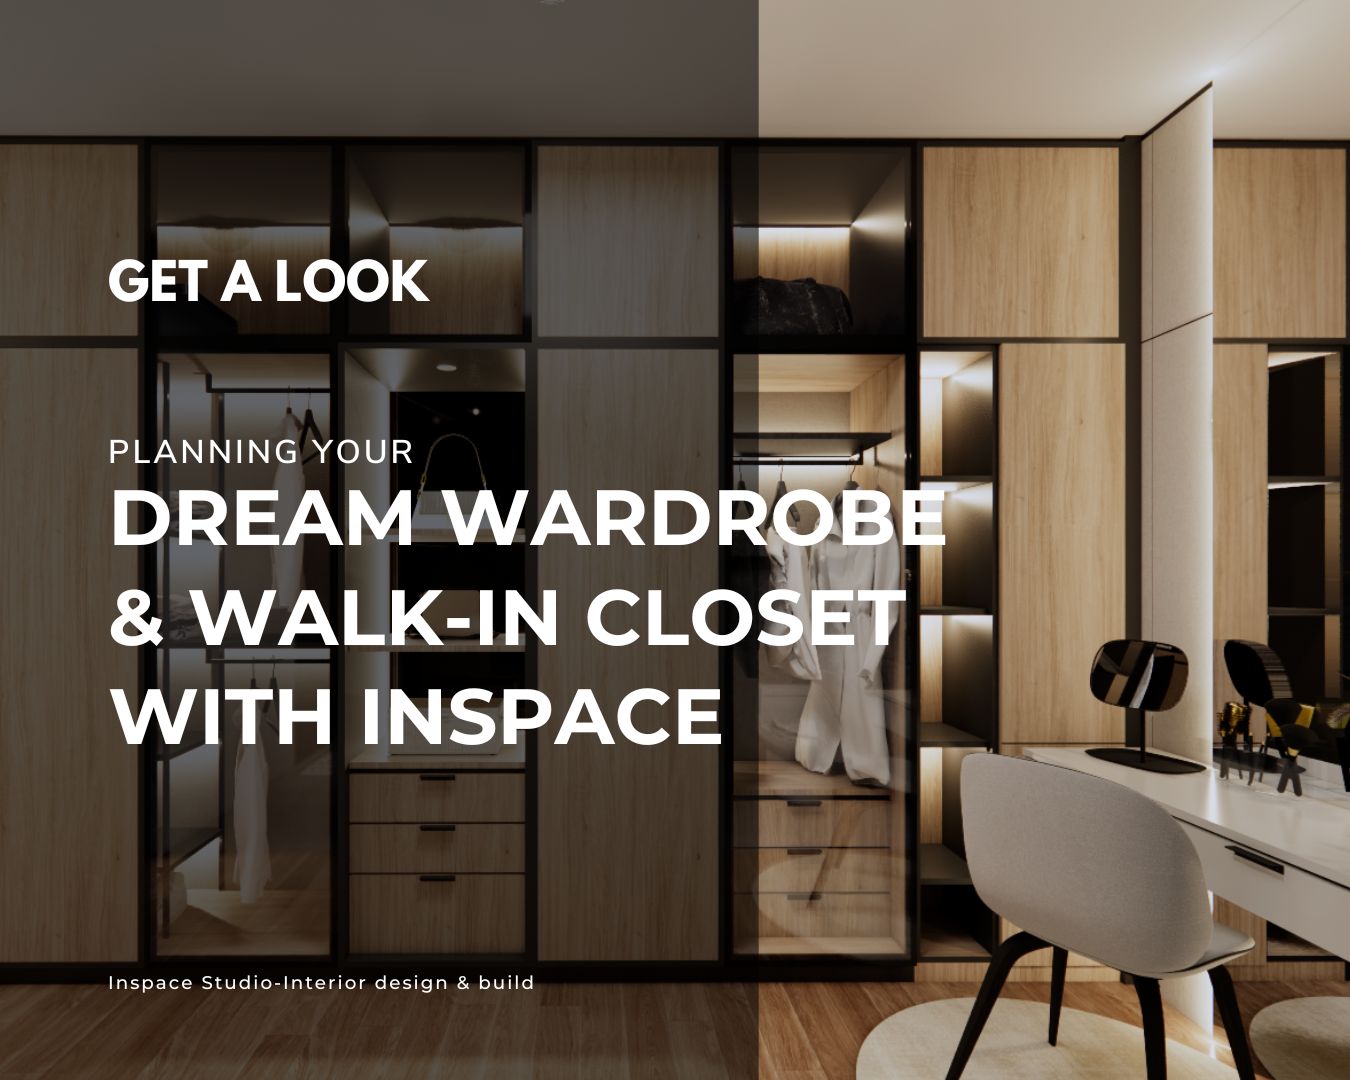 Planning your dream wardrobe & walk-in closet with inspace